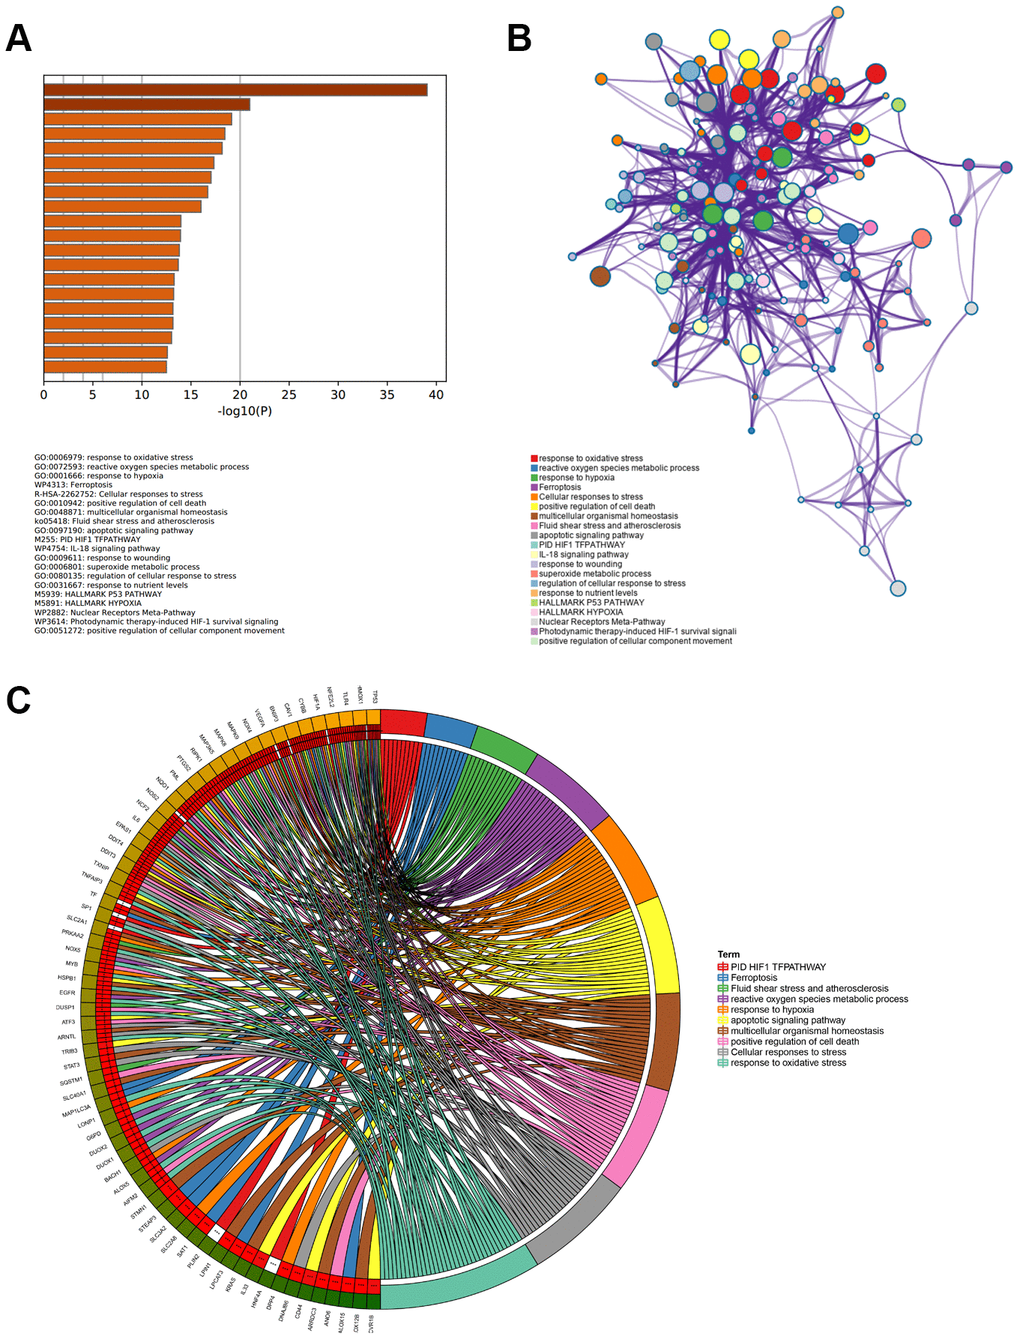 Enriched functions and pathways of ferroptosis-related DEGs. (A) The top 20 most significant enriched terms analyzed from Metascape, ranked according to –log10 (P) value. (B) The interaction network of 20 enriched terms, each identical color circle represents an enriched term. (C) The relationship between ferroptosis-related DEGs and top 10 enriched terms.